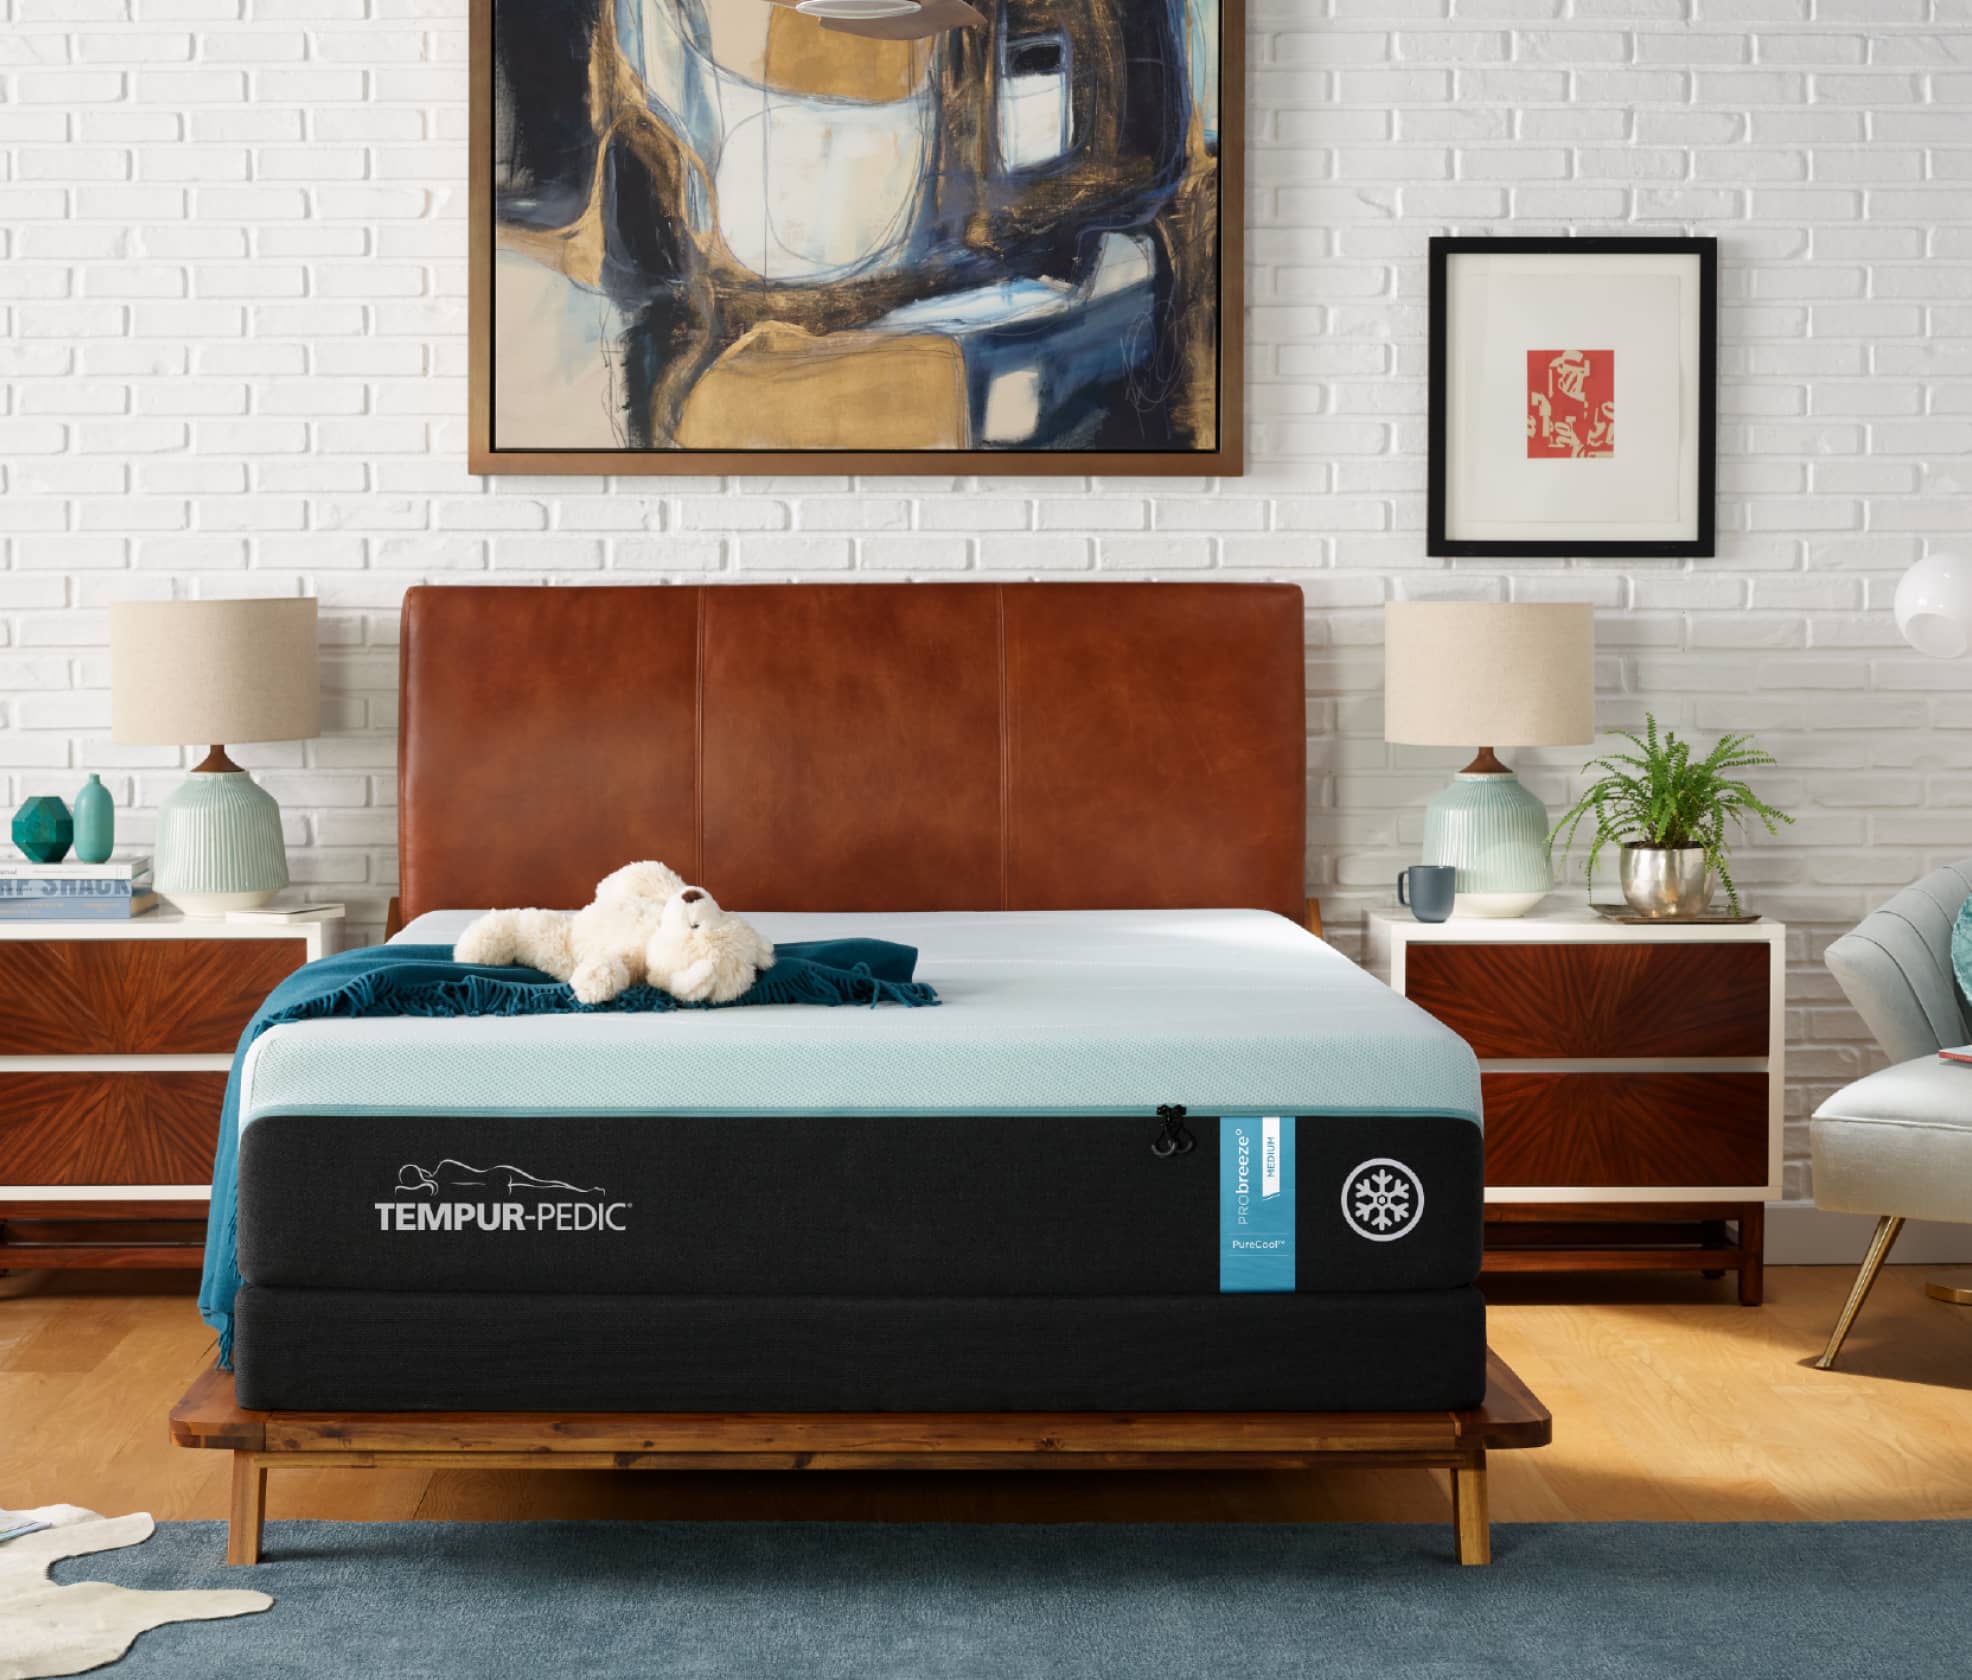 A ProBreeze Tempur-Pedic Mattress sits on a wooden bedframe with a brown leather headboard against a white brick wall. There is a gold, blue, and white abstract painting on the wall above the bed and two brown and white nightstands on either side of the bed.